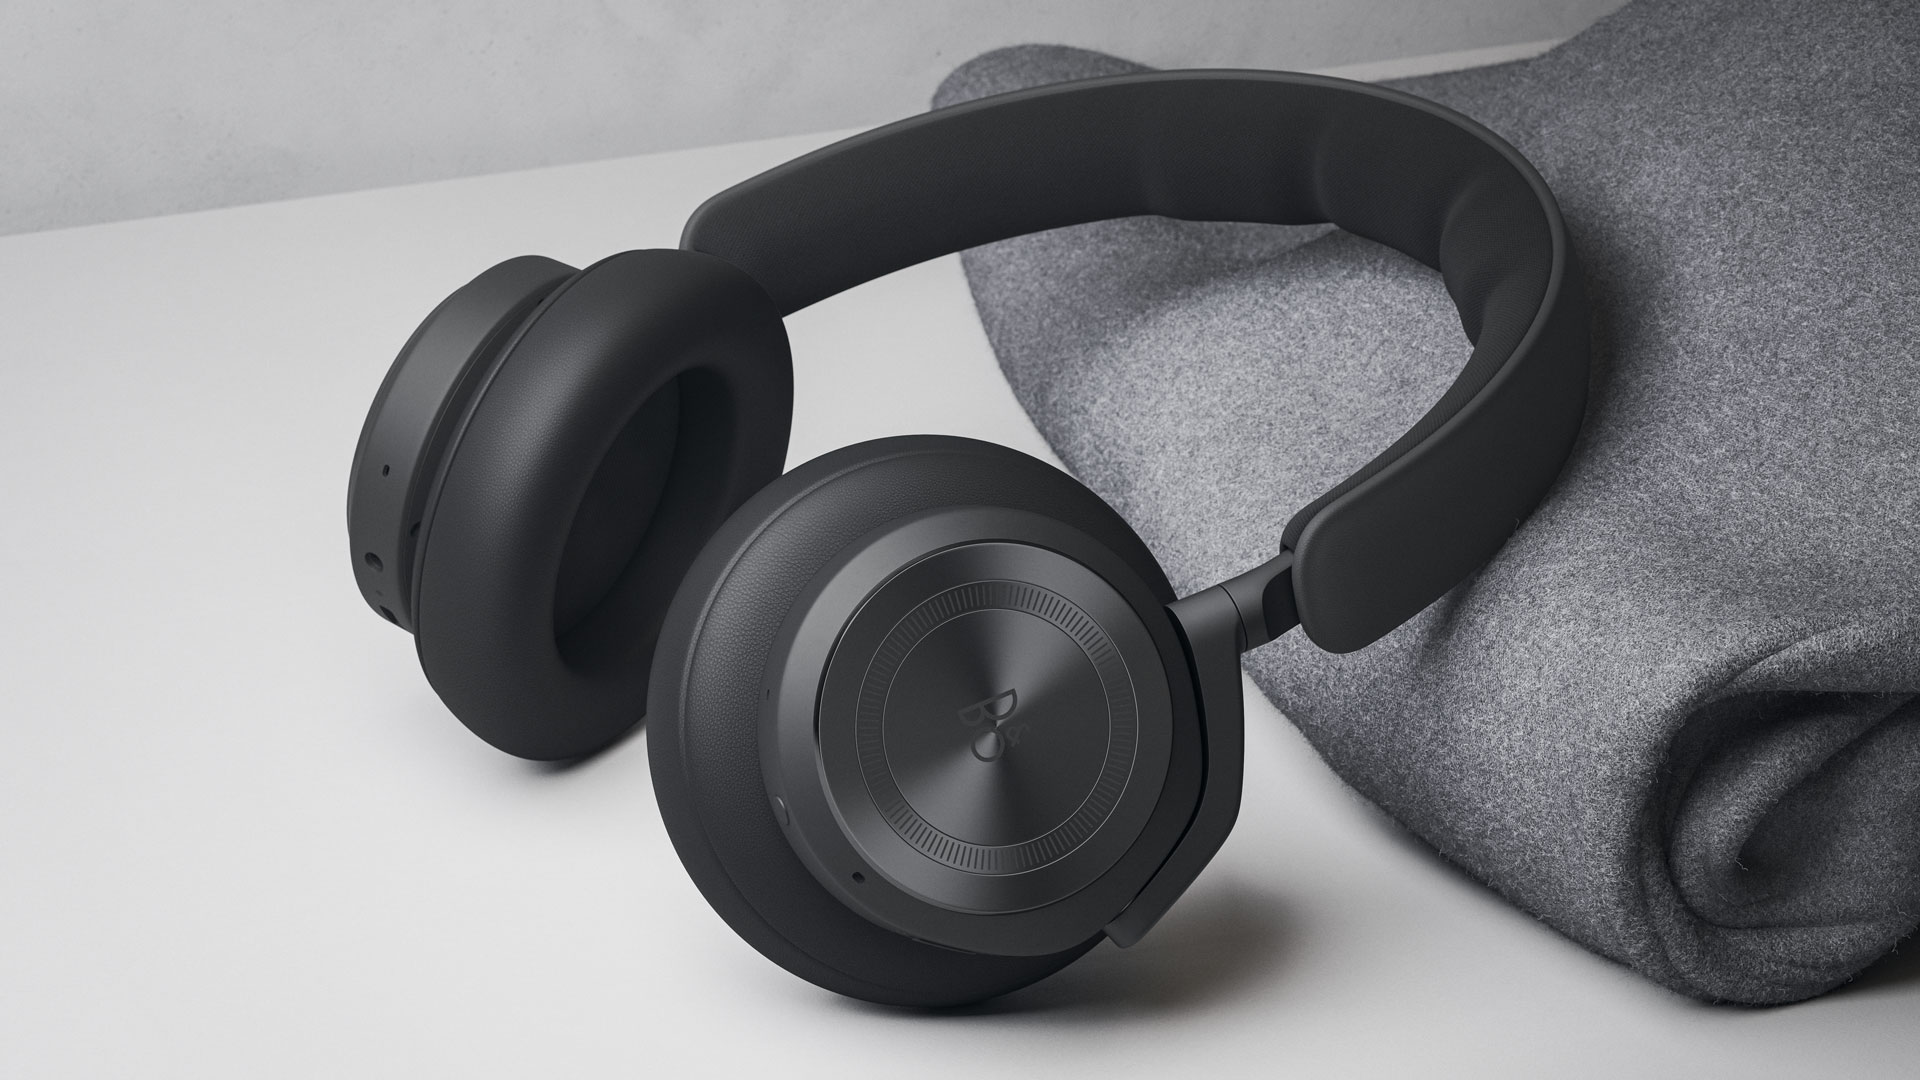 B&O Beoplay HX in Anthracite (Image Credit: Bang&Olufsen)